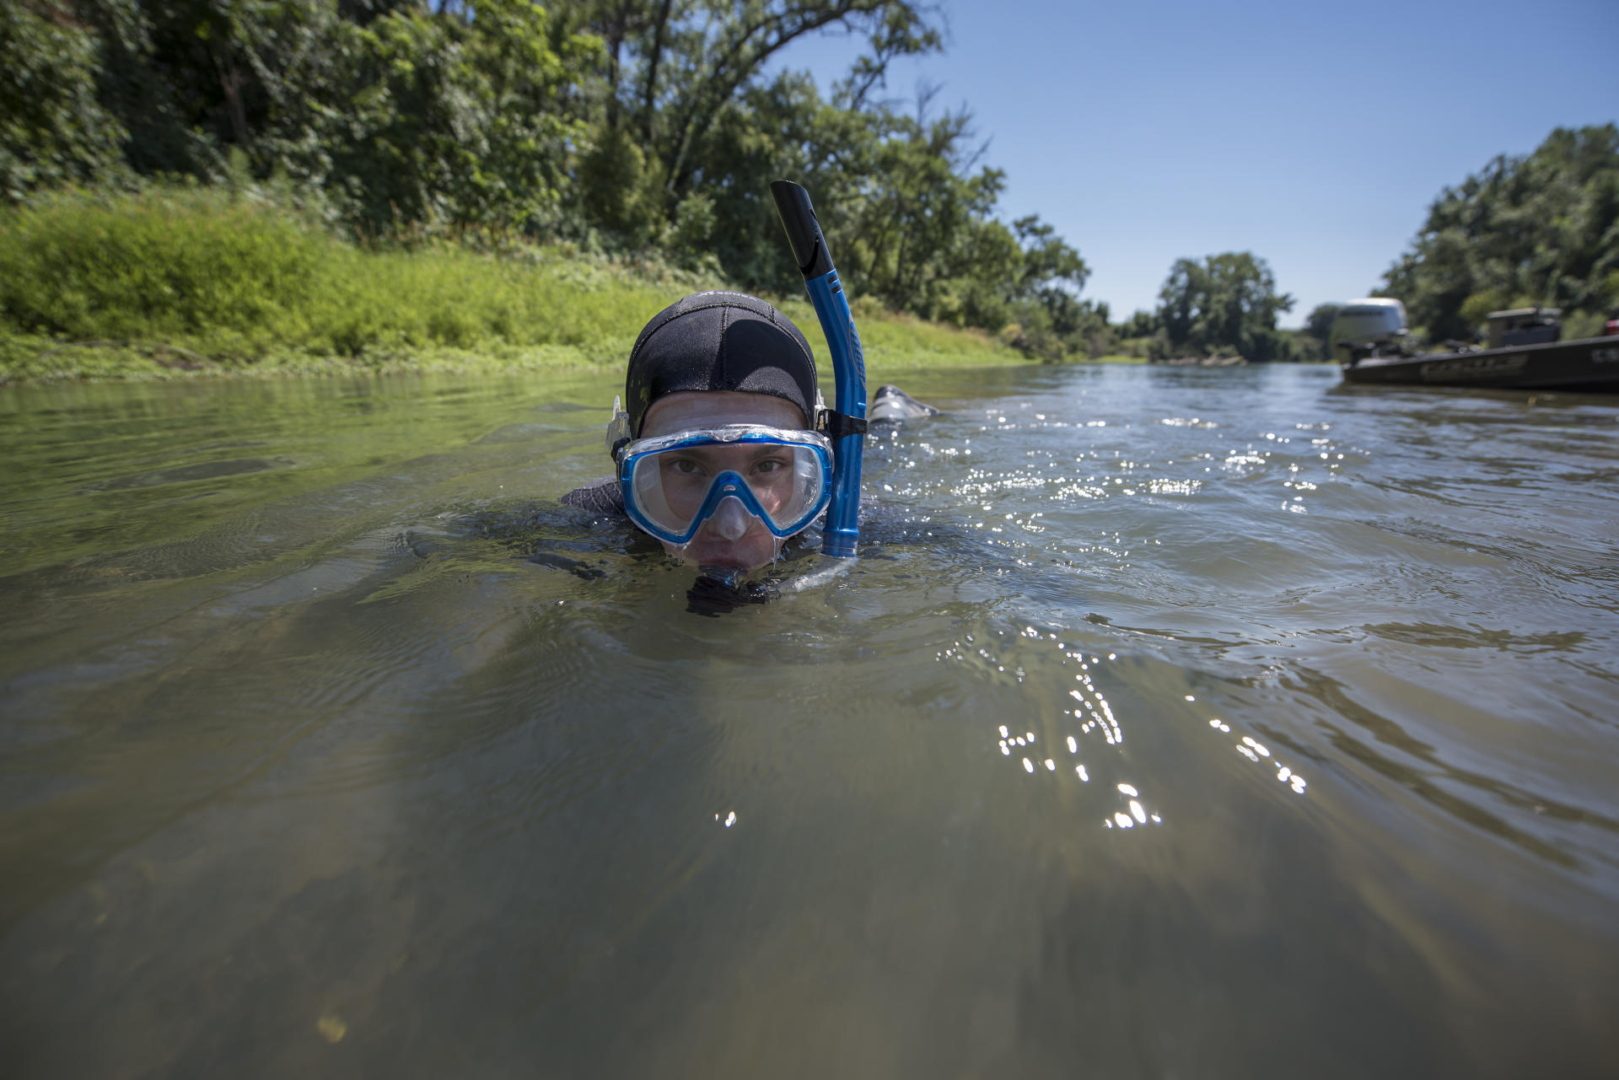 Carlos Estrada wades in a river while wearing snorkeling gear as he conducts research.